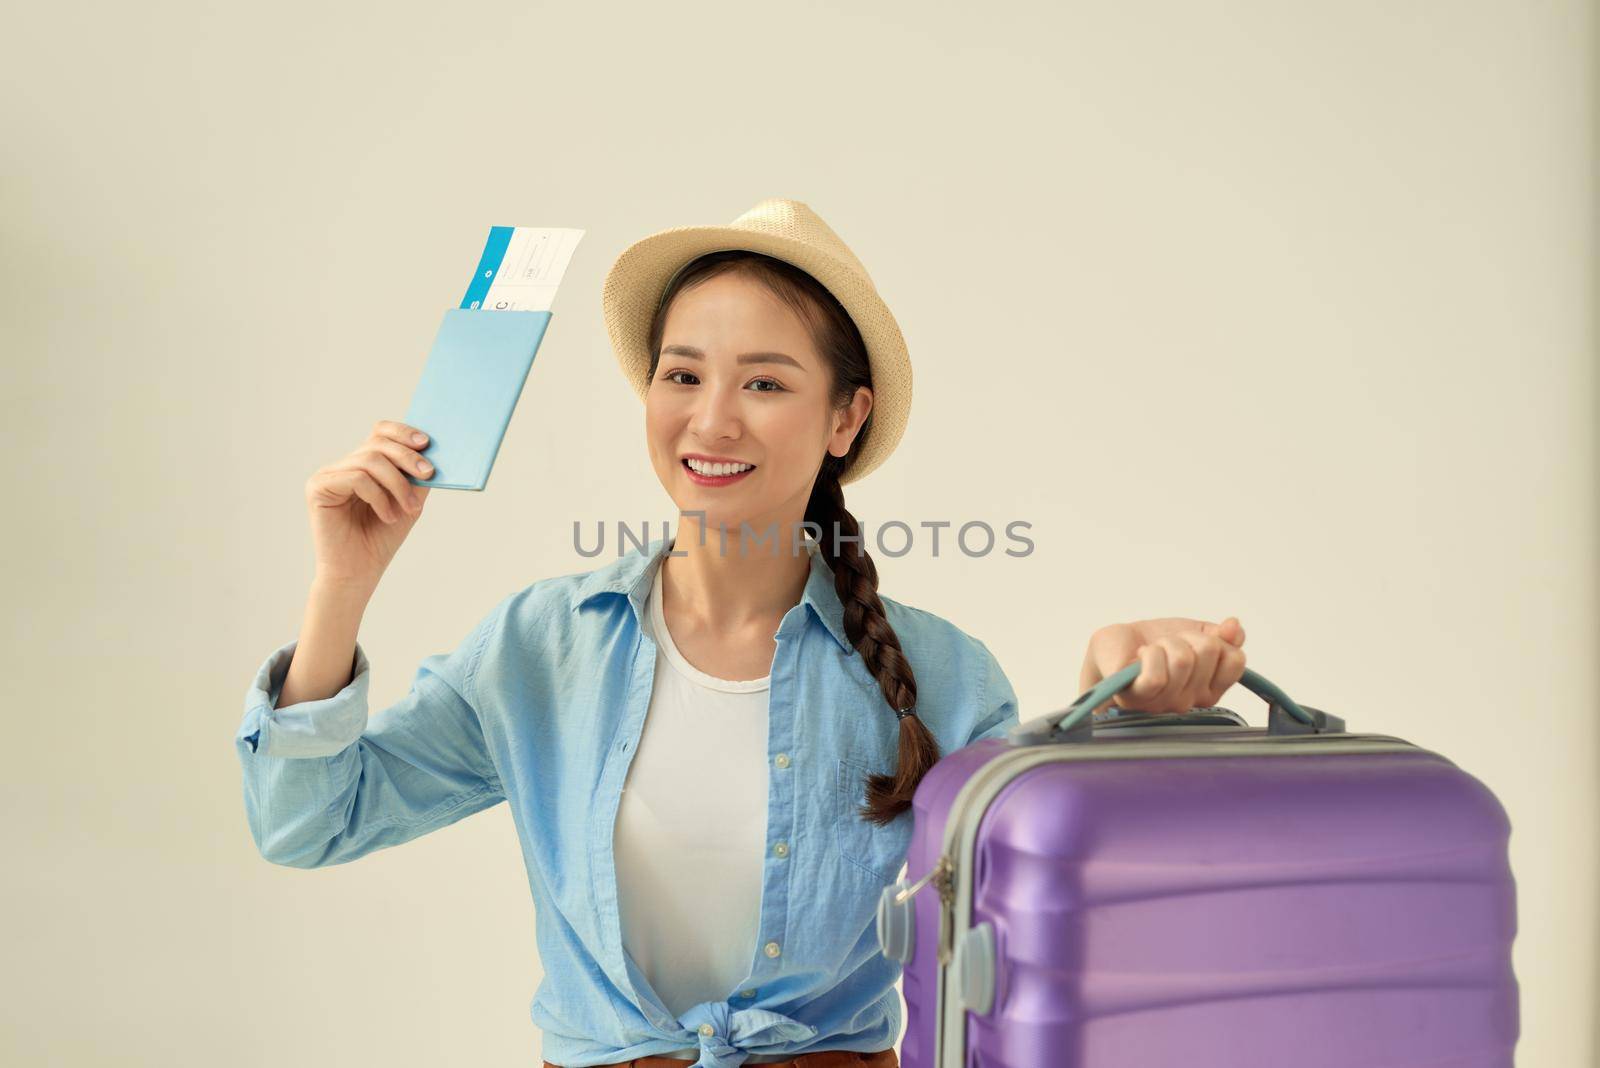 Passenger traveling abroad to travel on weekends getaway. Air flight journey concept